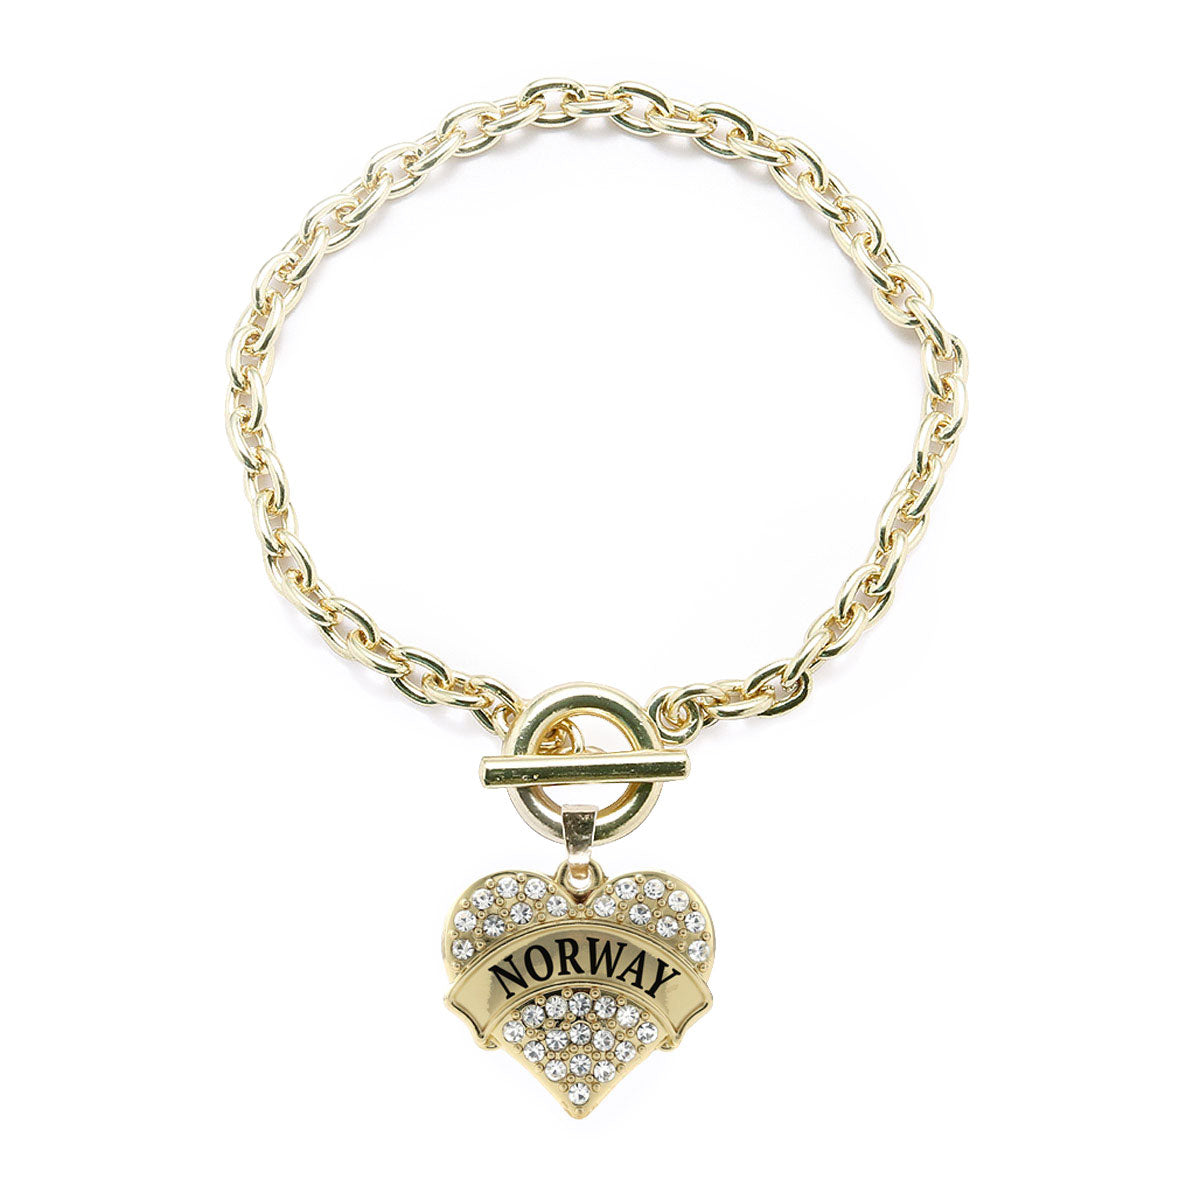 Gold Norway Pave Heart Charm Toggle Bracelet